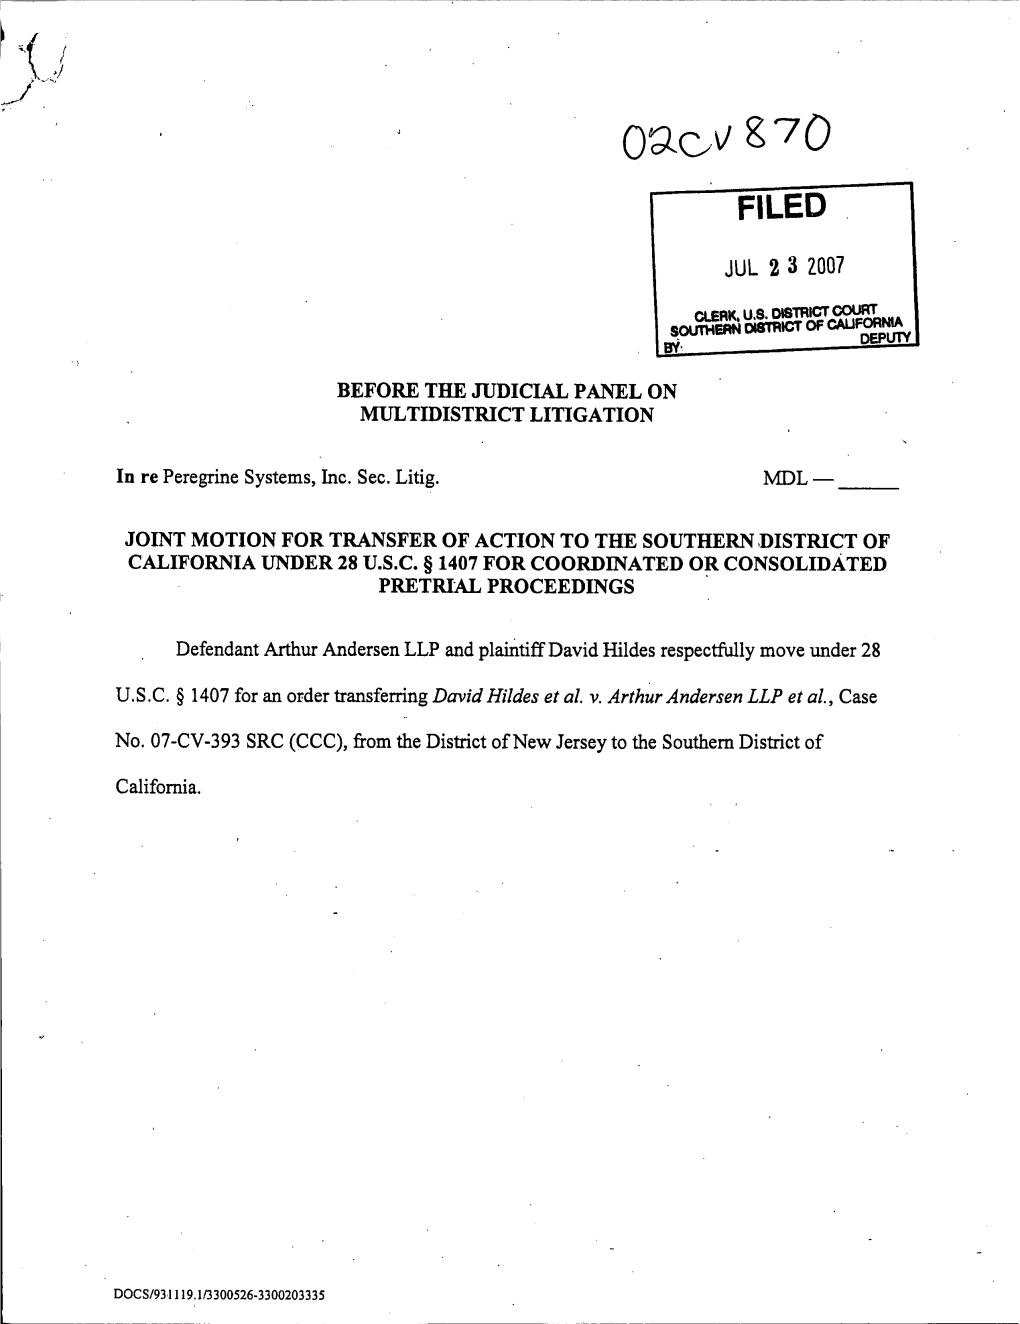 In Re: Peregrine Systems, Inc. Securities Litigation 02-CV-00870-Motion for Transfer of Action